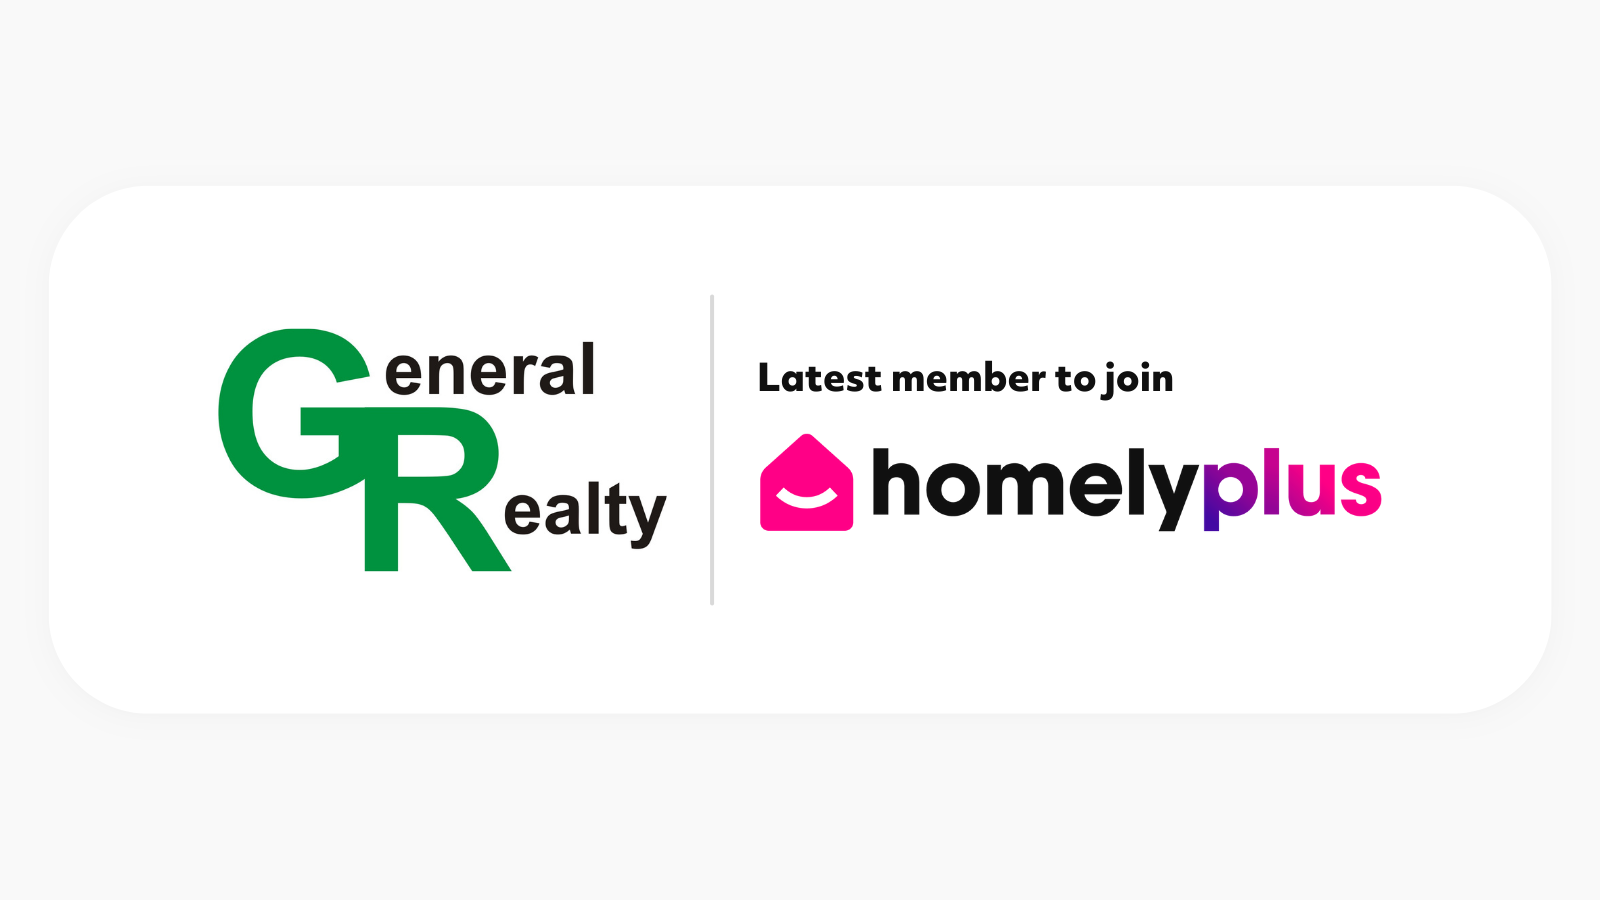 General Realty joins Homely plus